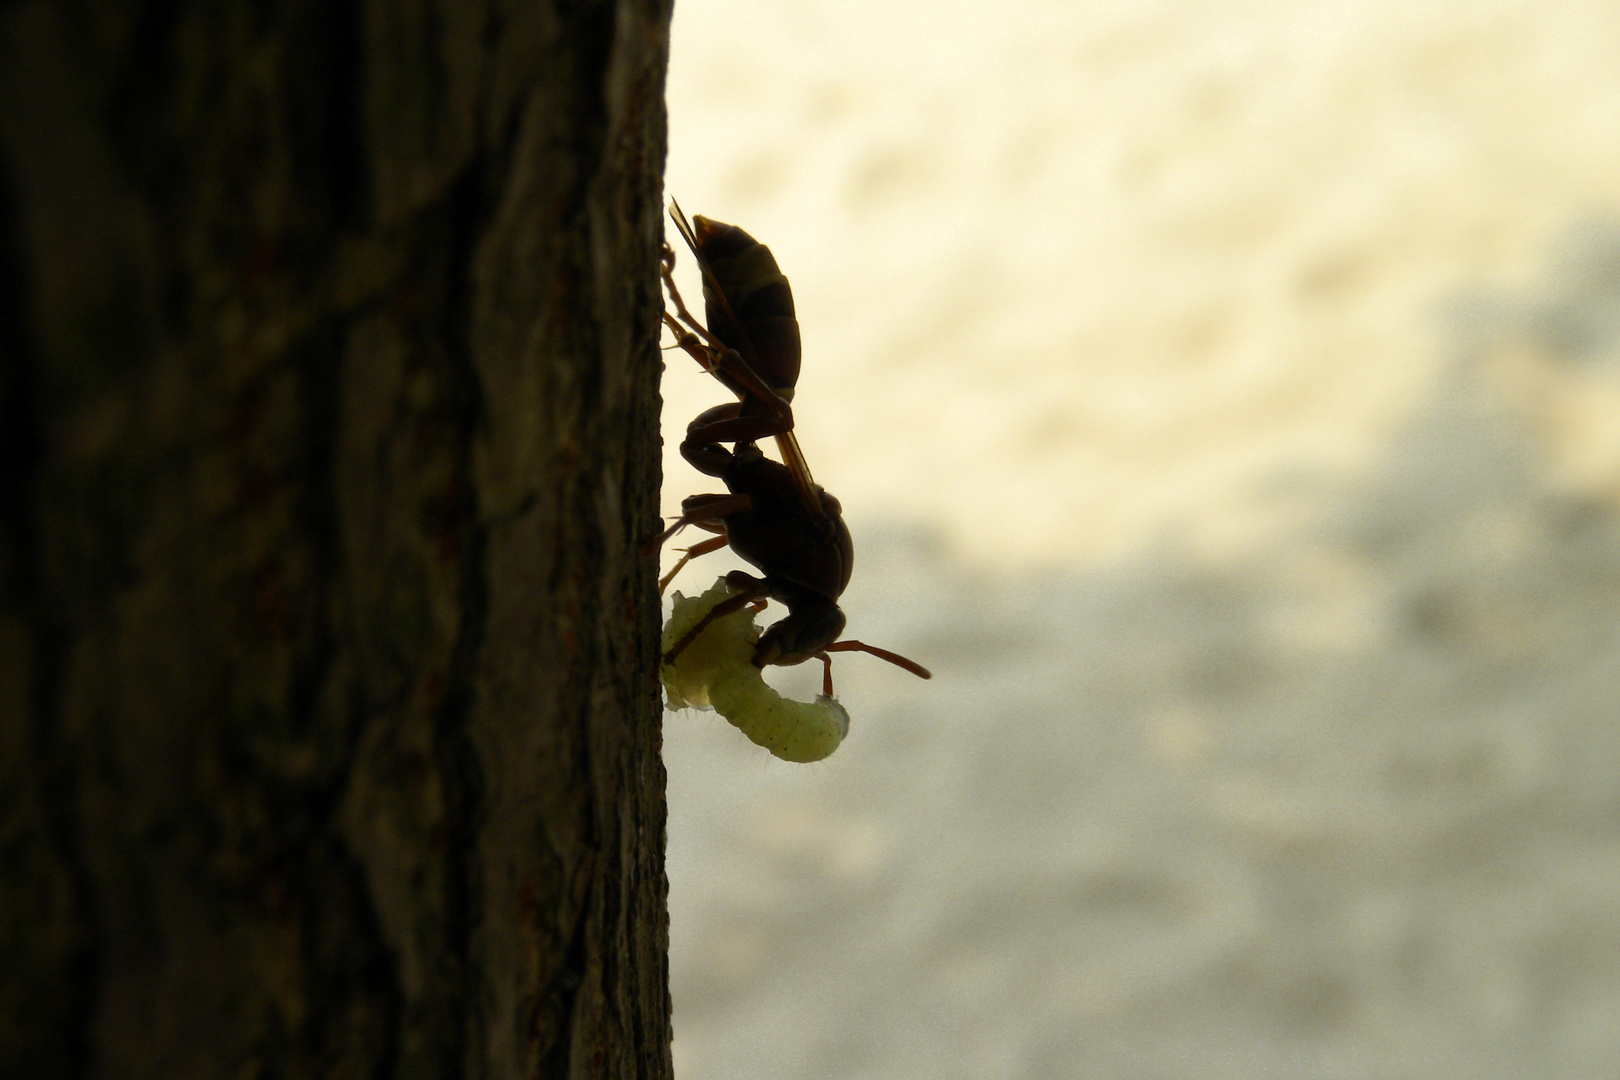 Snacking Wasp